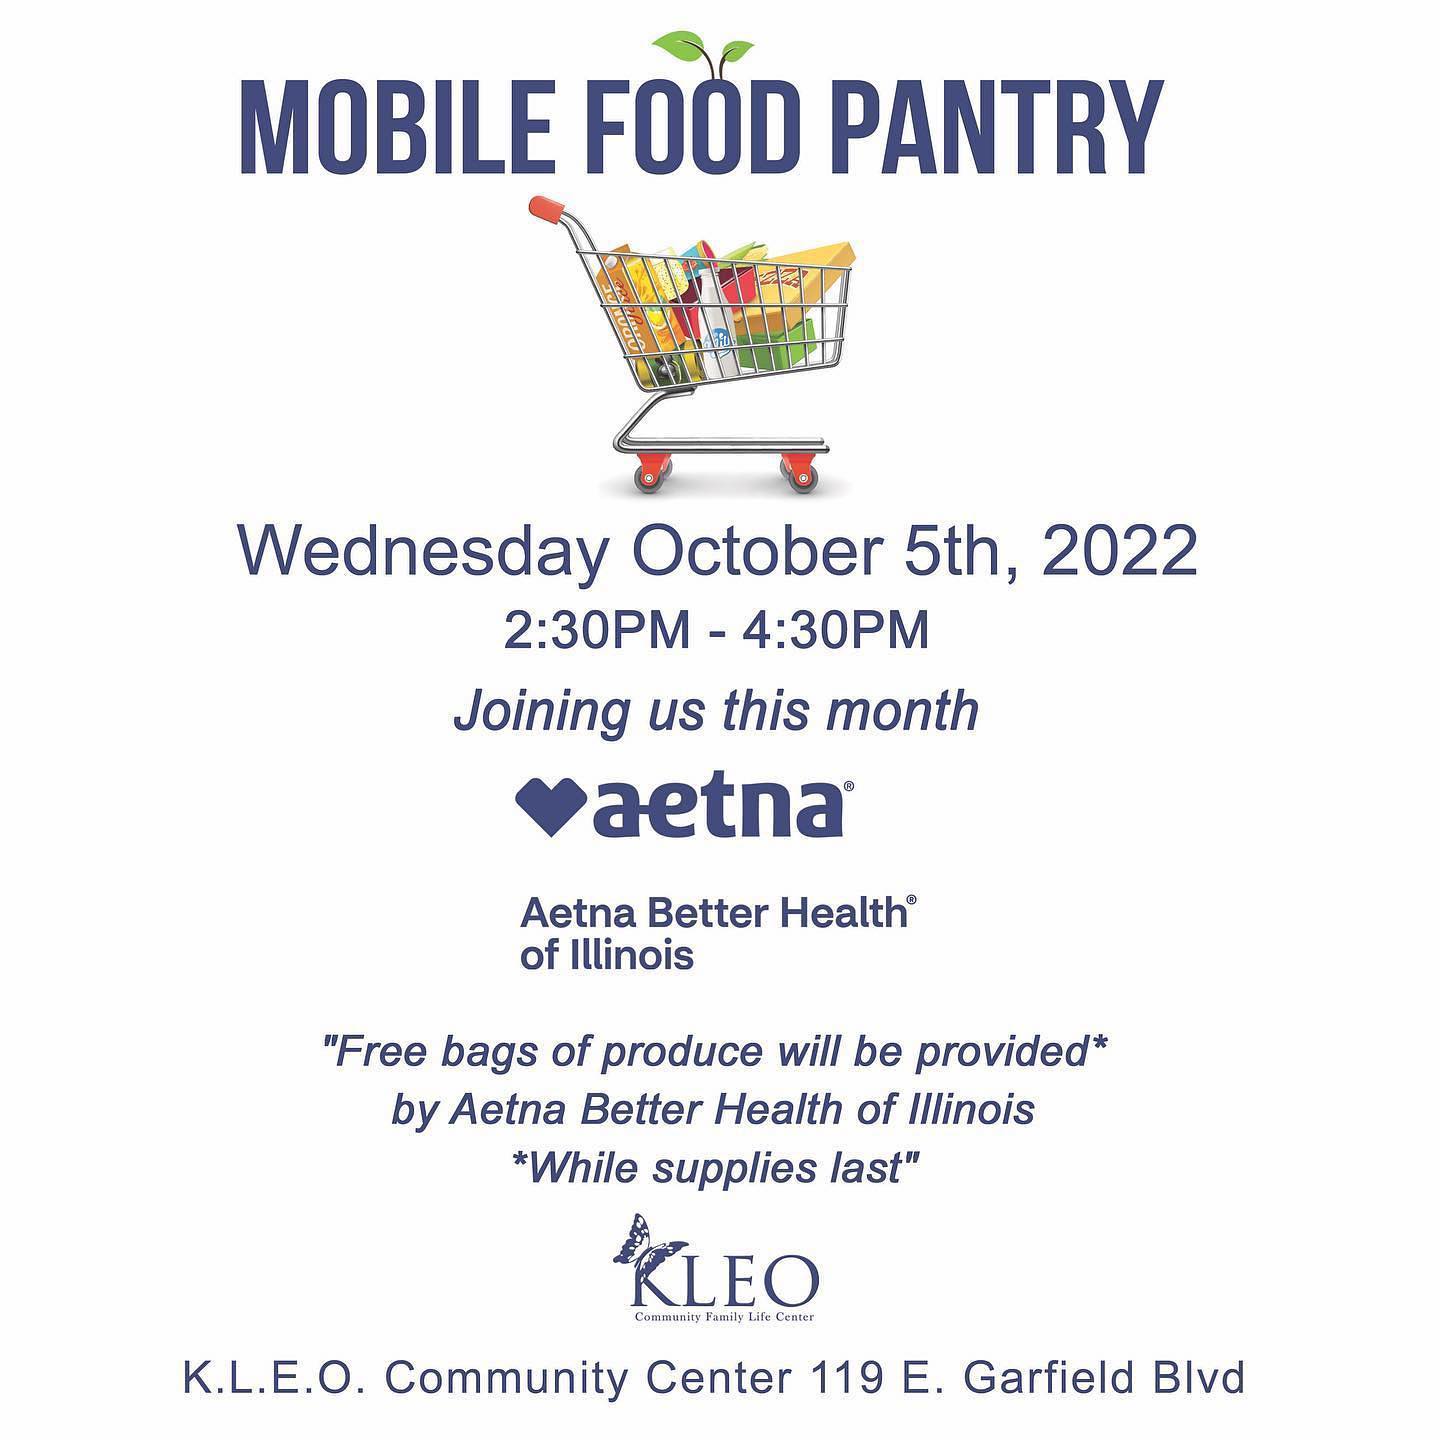 .

MOBILE FOOD PANTRY 🥫🛒
Wednesday October 5th, 2022
2:30PM - 4:30PM

Joining us this month
Aetna Better Health® of Illinois "Free bags of produce will be provided* by Aetna Better Health of Illinois *While supplies last"

K.L.E.O. Community Center 119 E. Garfield Blvd

#mobilefoodpantry #kleo #kleocommunitycenter #keeplovingeachother #foodpantry #freefood #foodgiveaway #groceries #washingtonpark #aetnabetterhealth